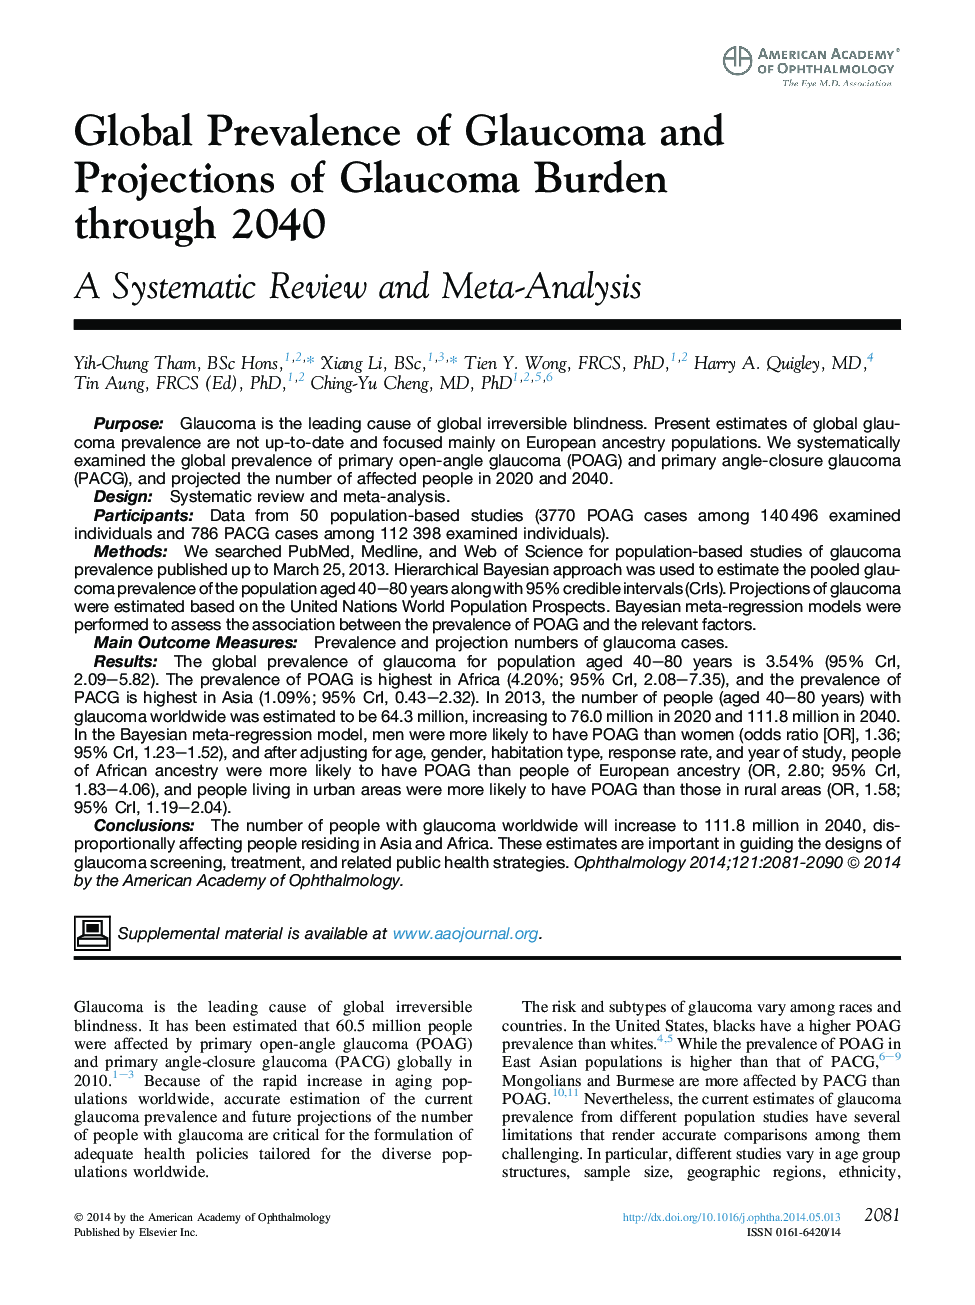 Global Prevalence of Glaucoma and Projections of Glaucoma Burden through 2040